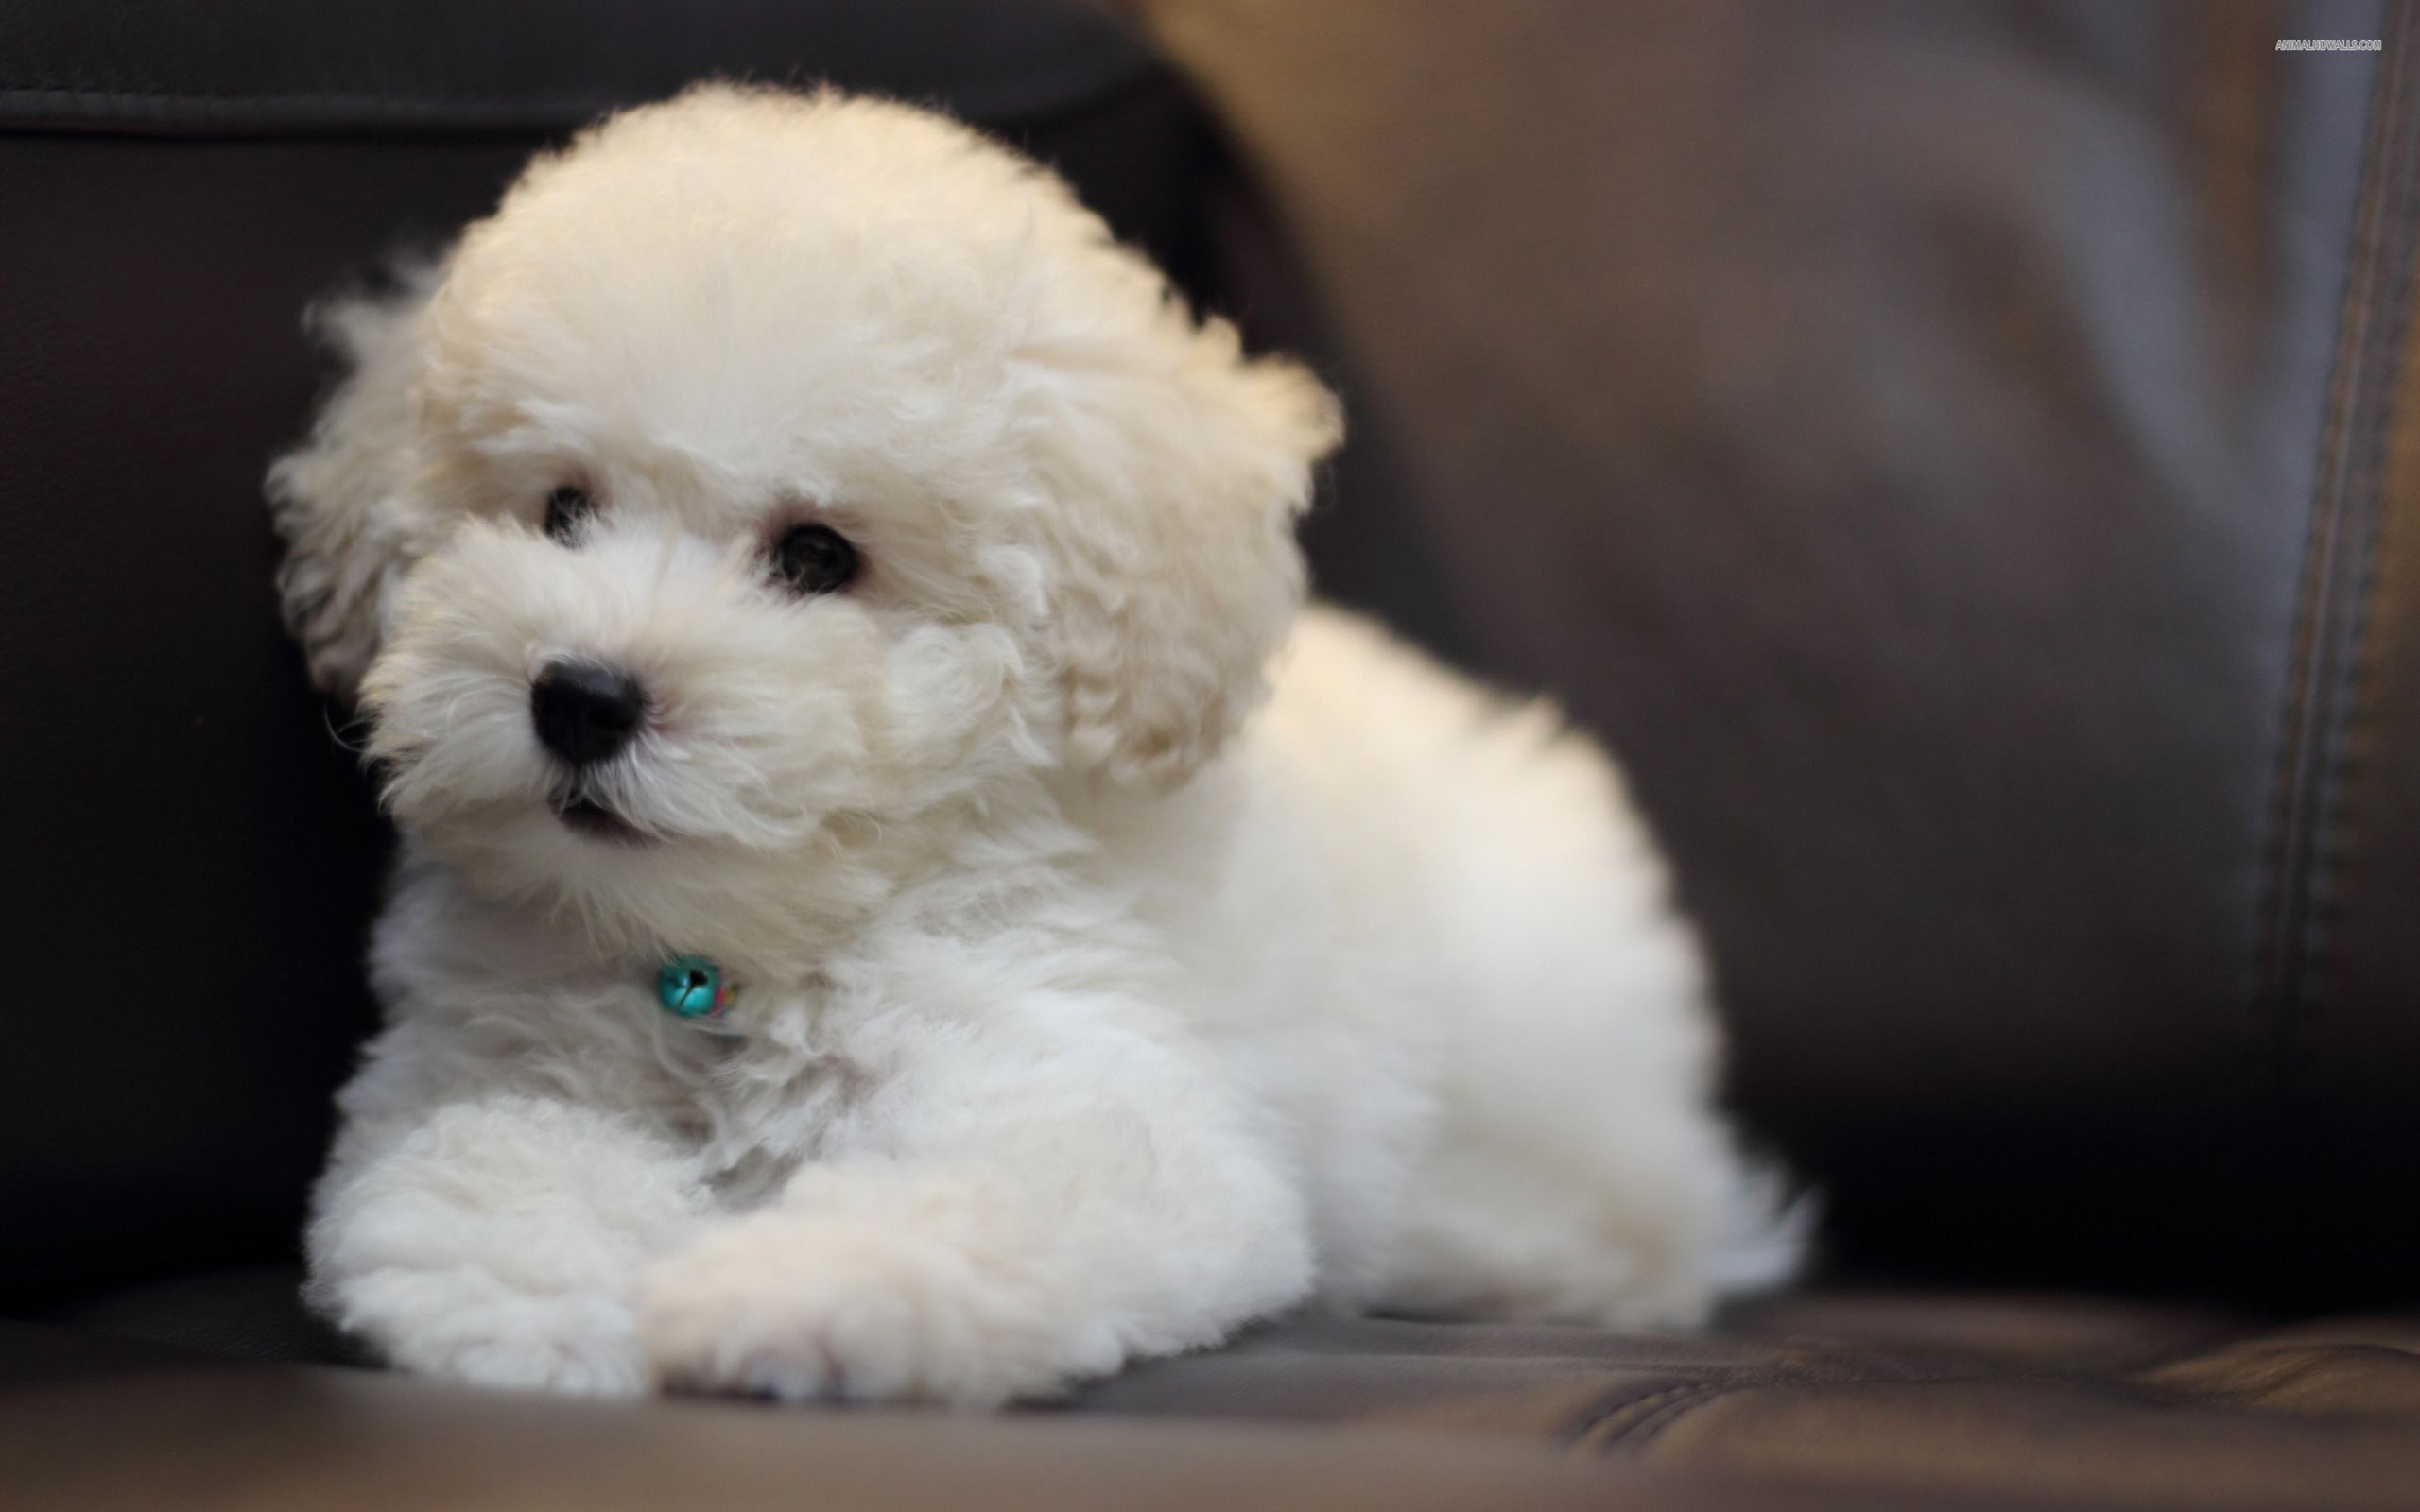 Puppy Bichon Frise on a leather couch wallpaper and image